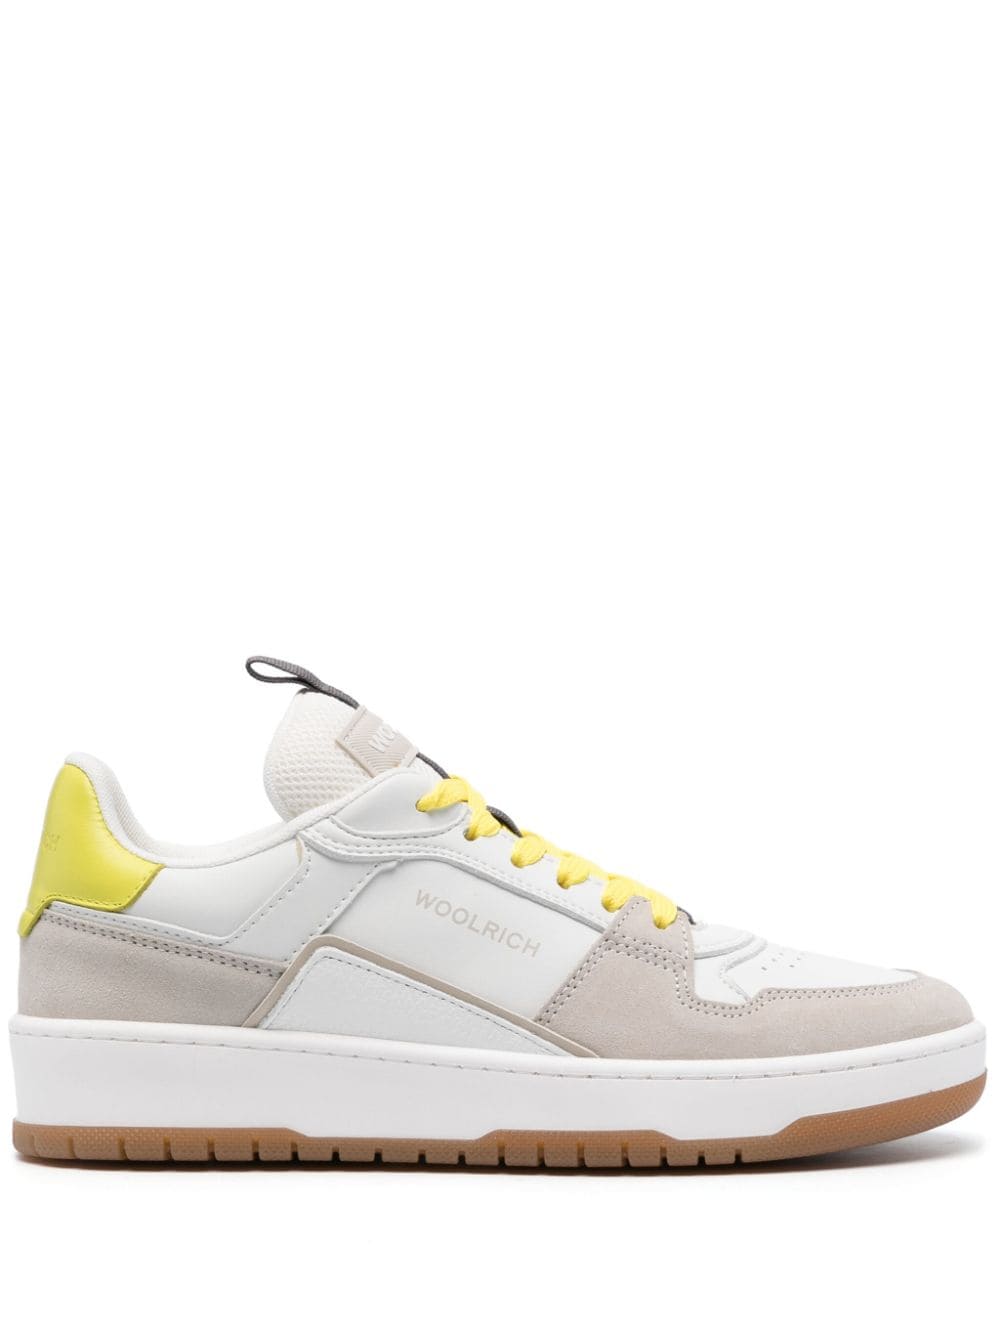 Woolrich logo-print panelled leather sneakers - White von Woolrich